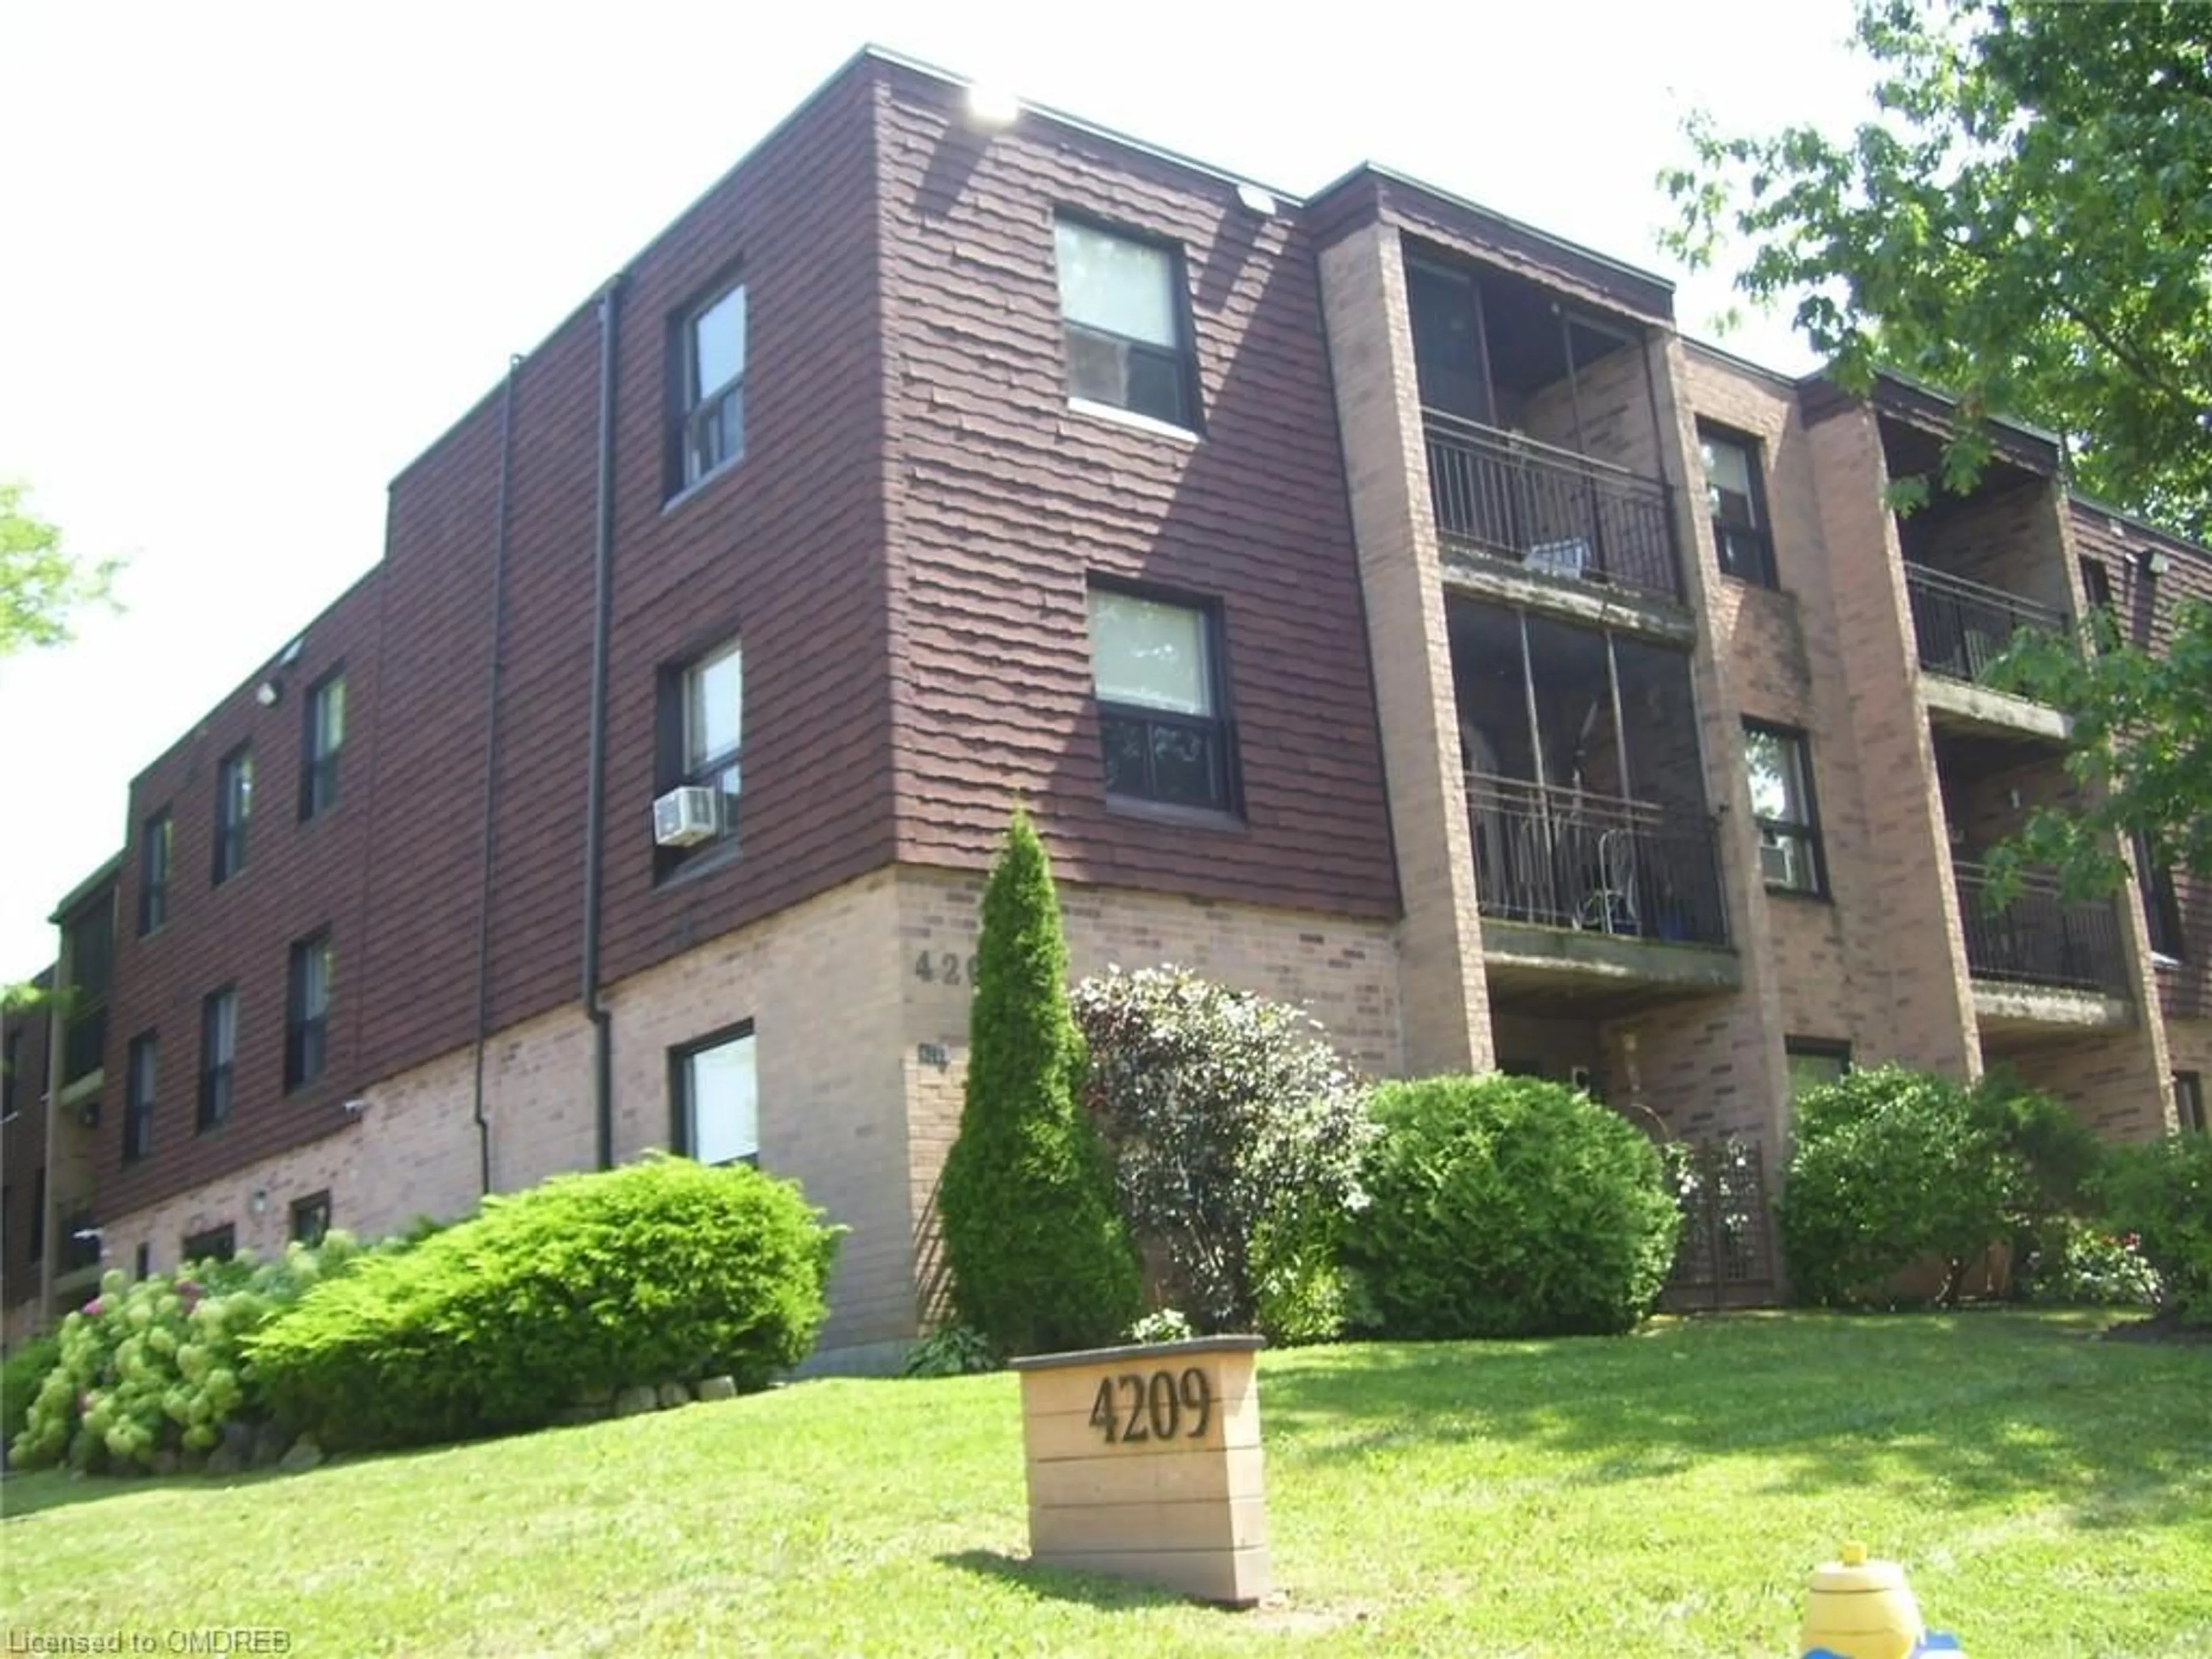 A pic from exterior of the house or condo for 4209 Hixon St #304, Beamsville Ontario L3J 0K2